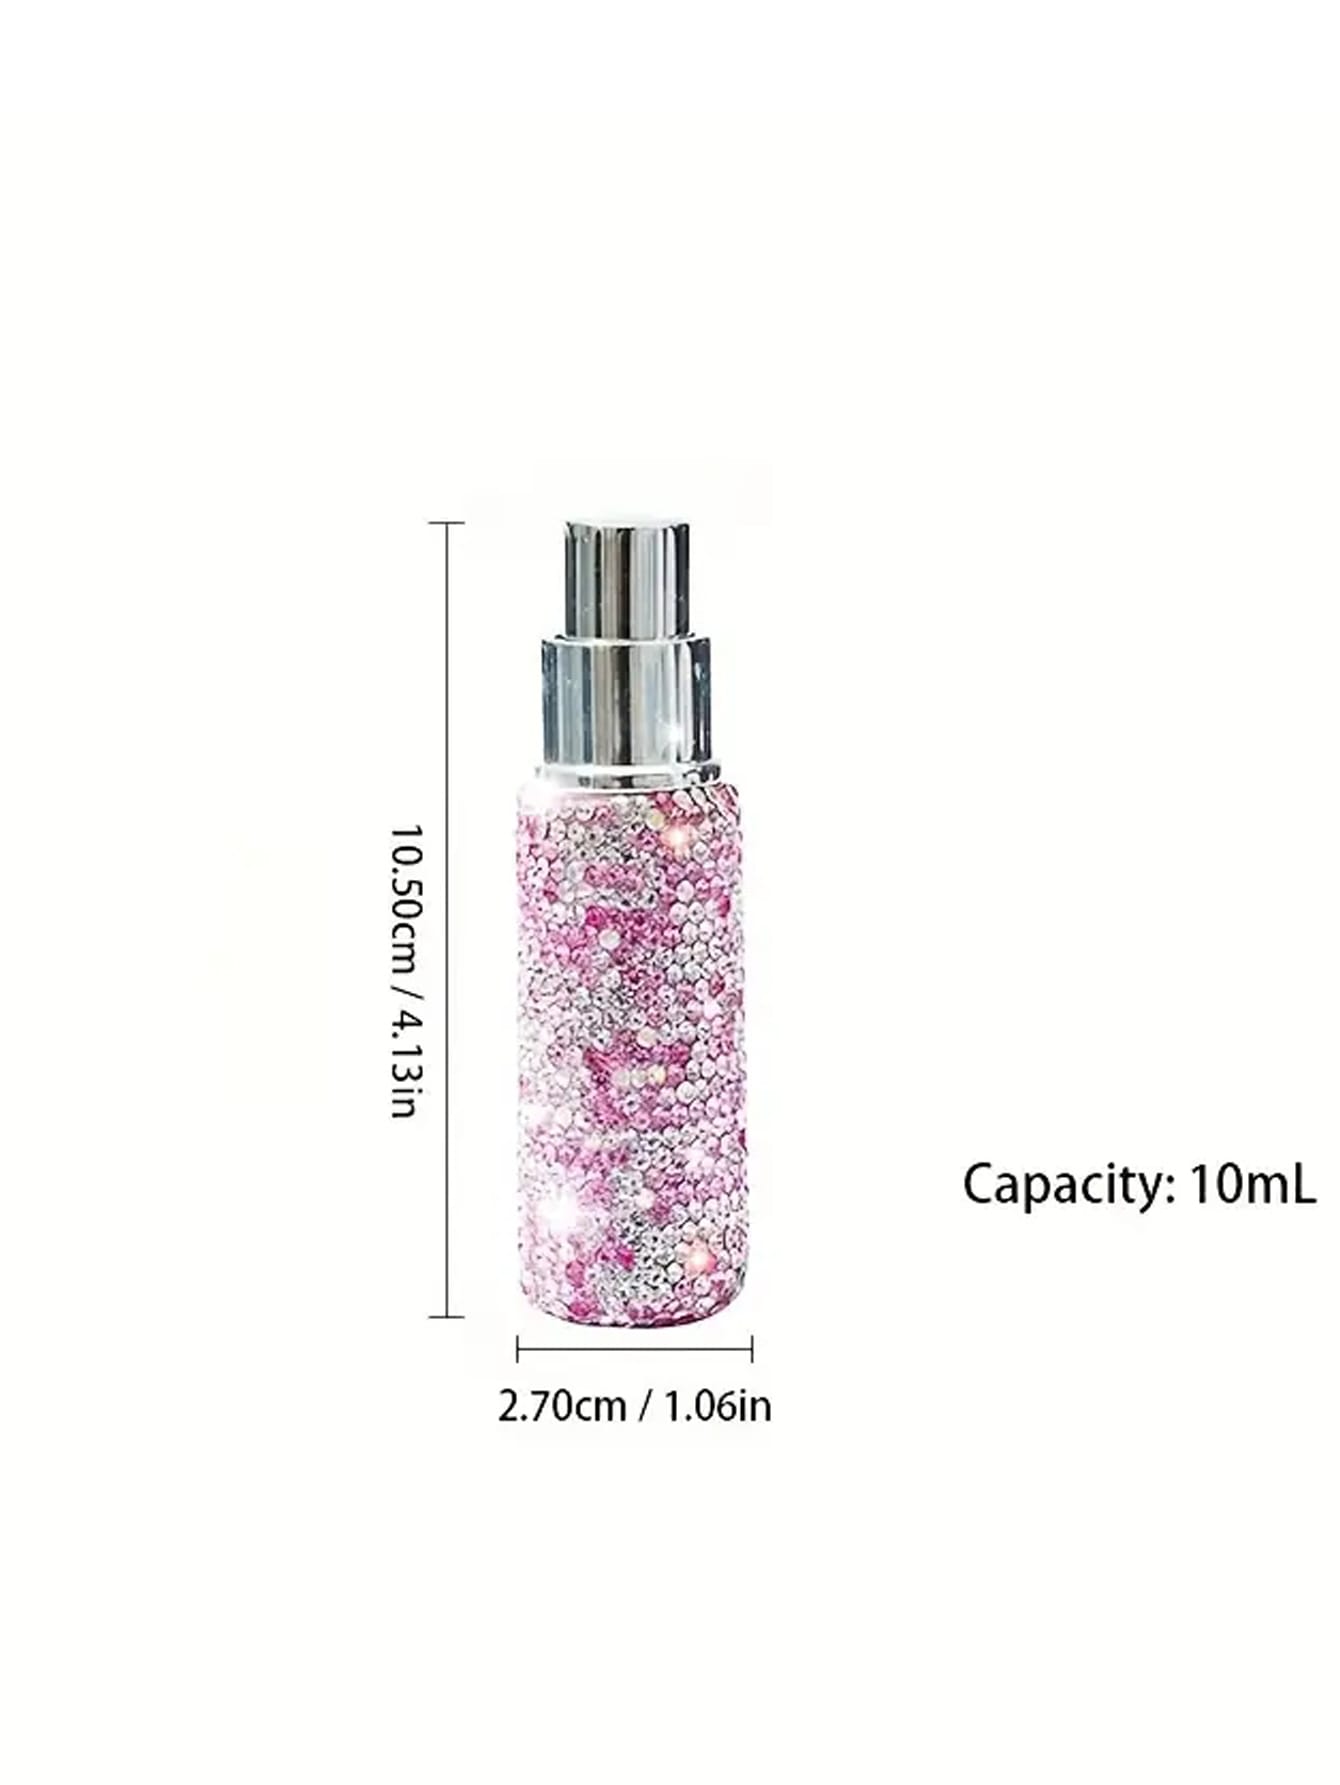 10ml Portable Vacuum Press Bottle For Perfume Refill, Spray Bottle With Fine Mist Sprayer, Diamond Decorated, Ideal For Travel, Makeup And Skincare-Multicolor-6